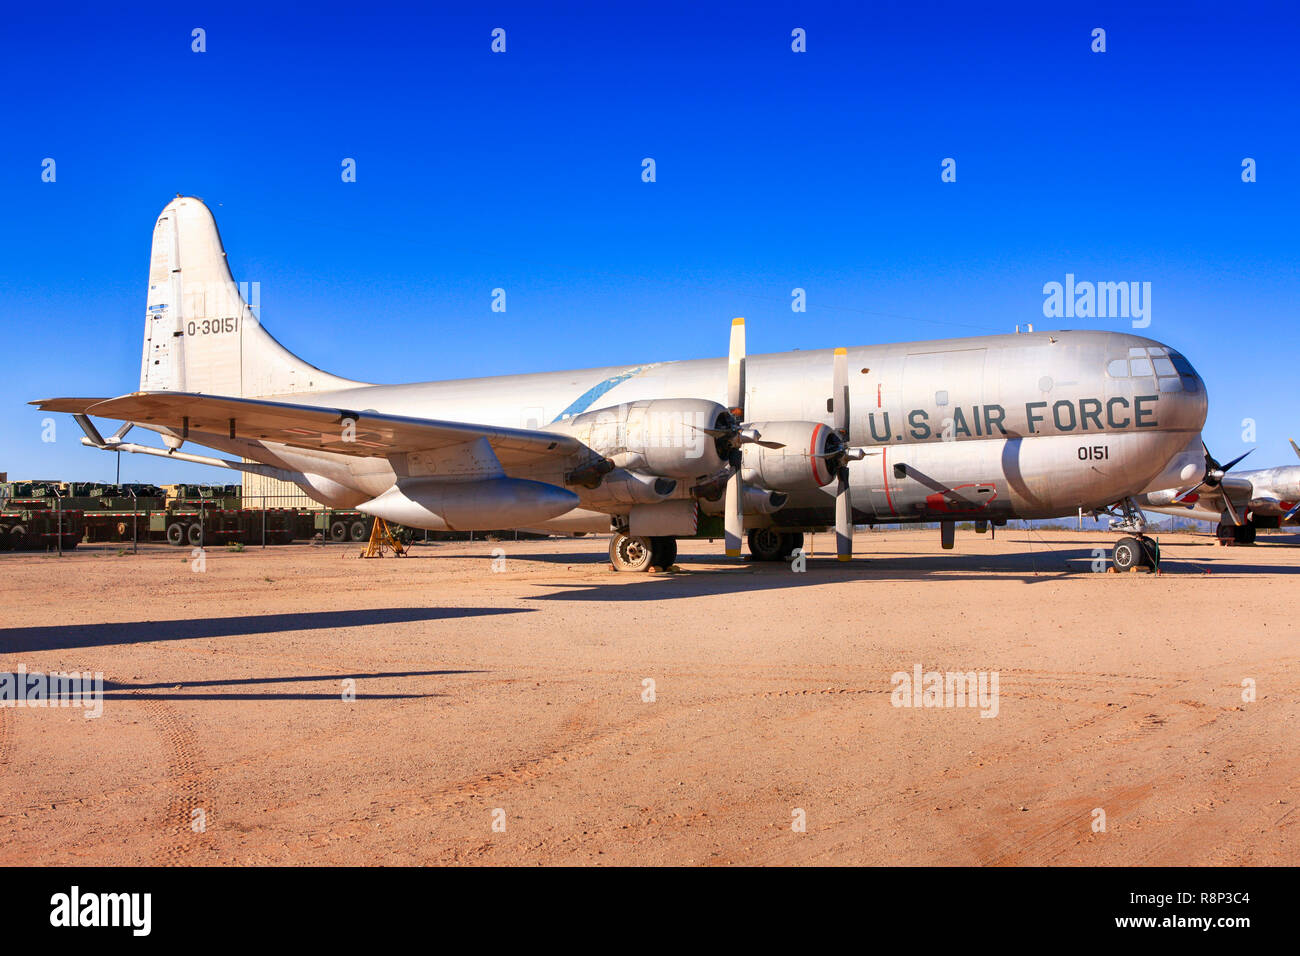 1951 Boeing KC-97 Stratofreighter flight refuelling plane on display at the Pima Air & Space Museum in Tucson, AZ Stock Photo